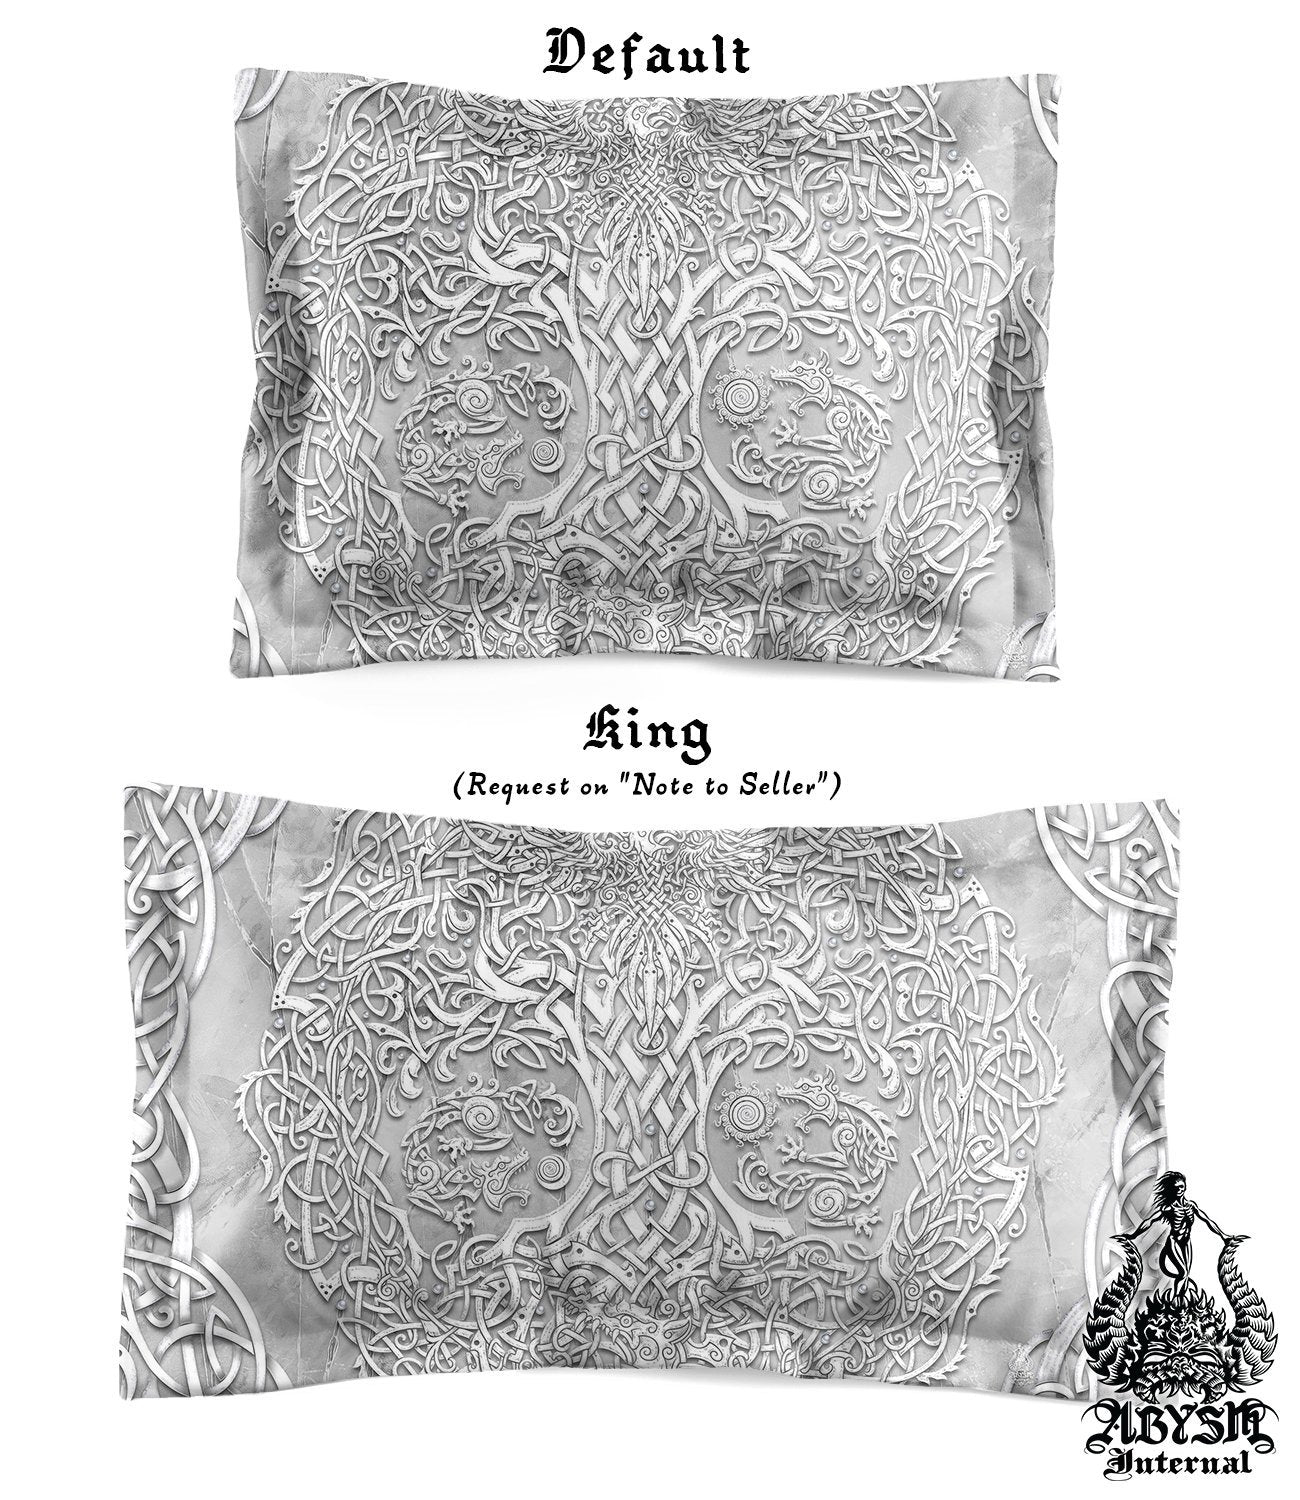 Yggdrasil Bedding Set, Comforter and Duvet, Viking Tree of Life, Norse Bed Cover and Bedroom Decor, King, Queen and Twin Size - Stone - Abysm Internal